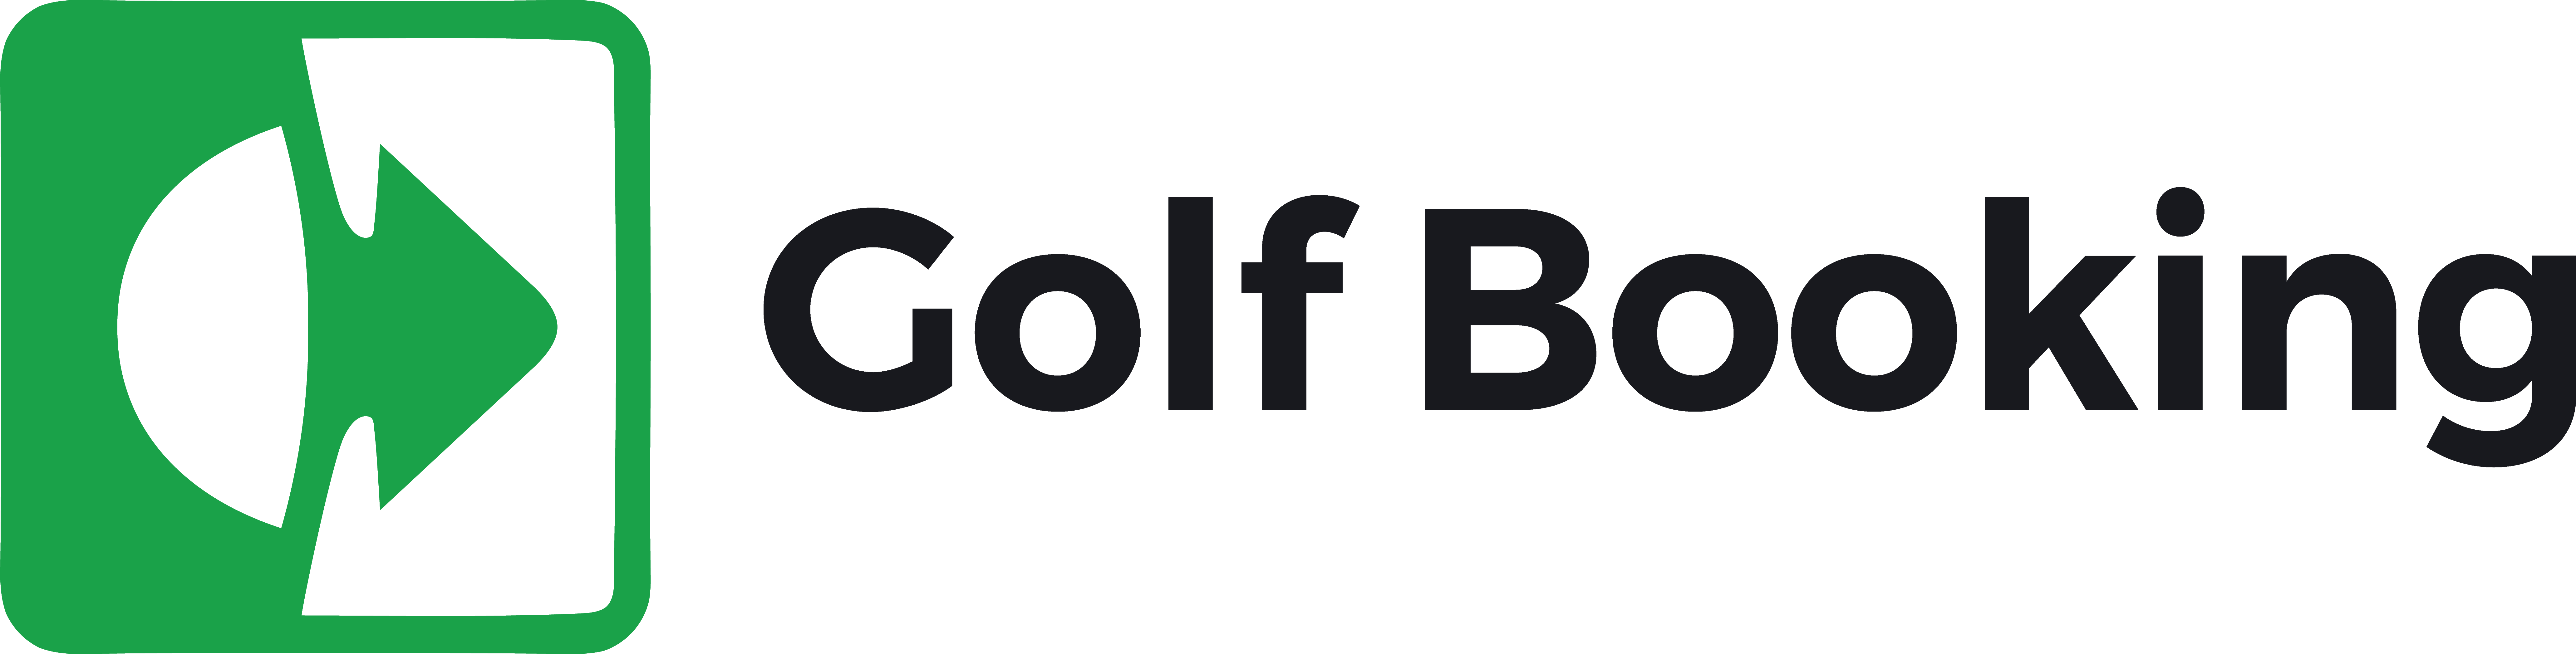 Golf Booking - Book a round of golf on over 700 courses